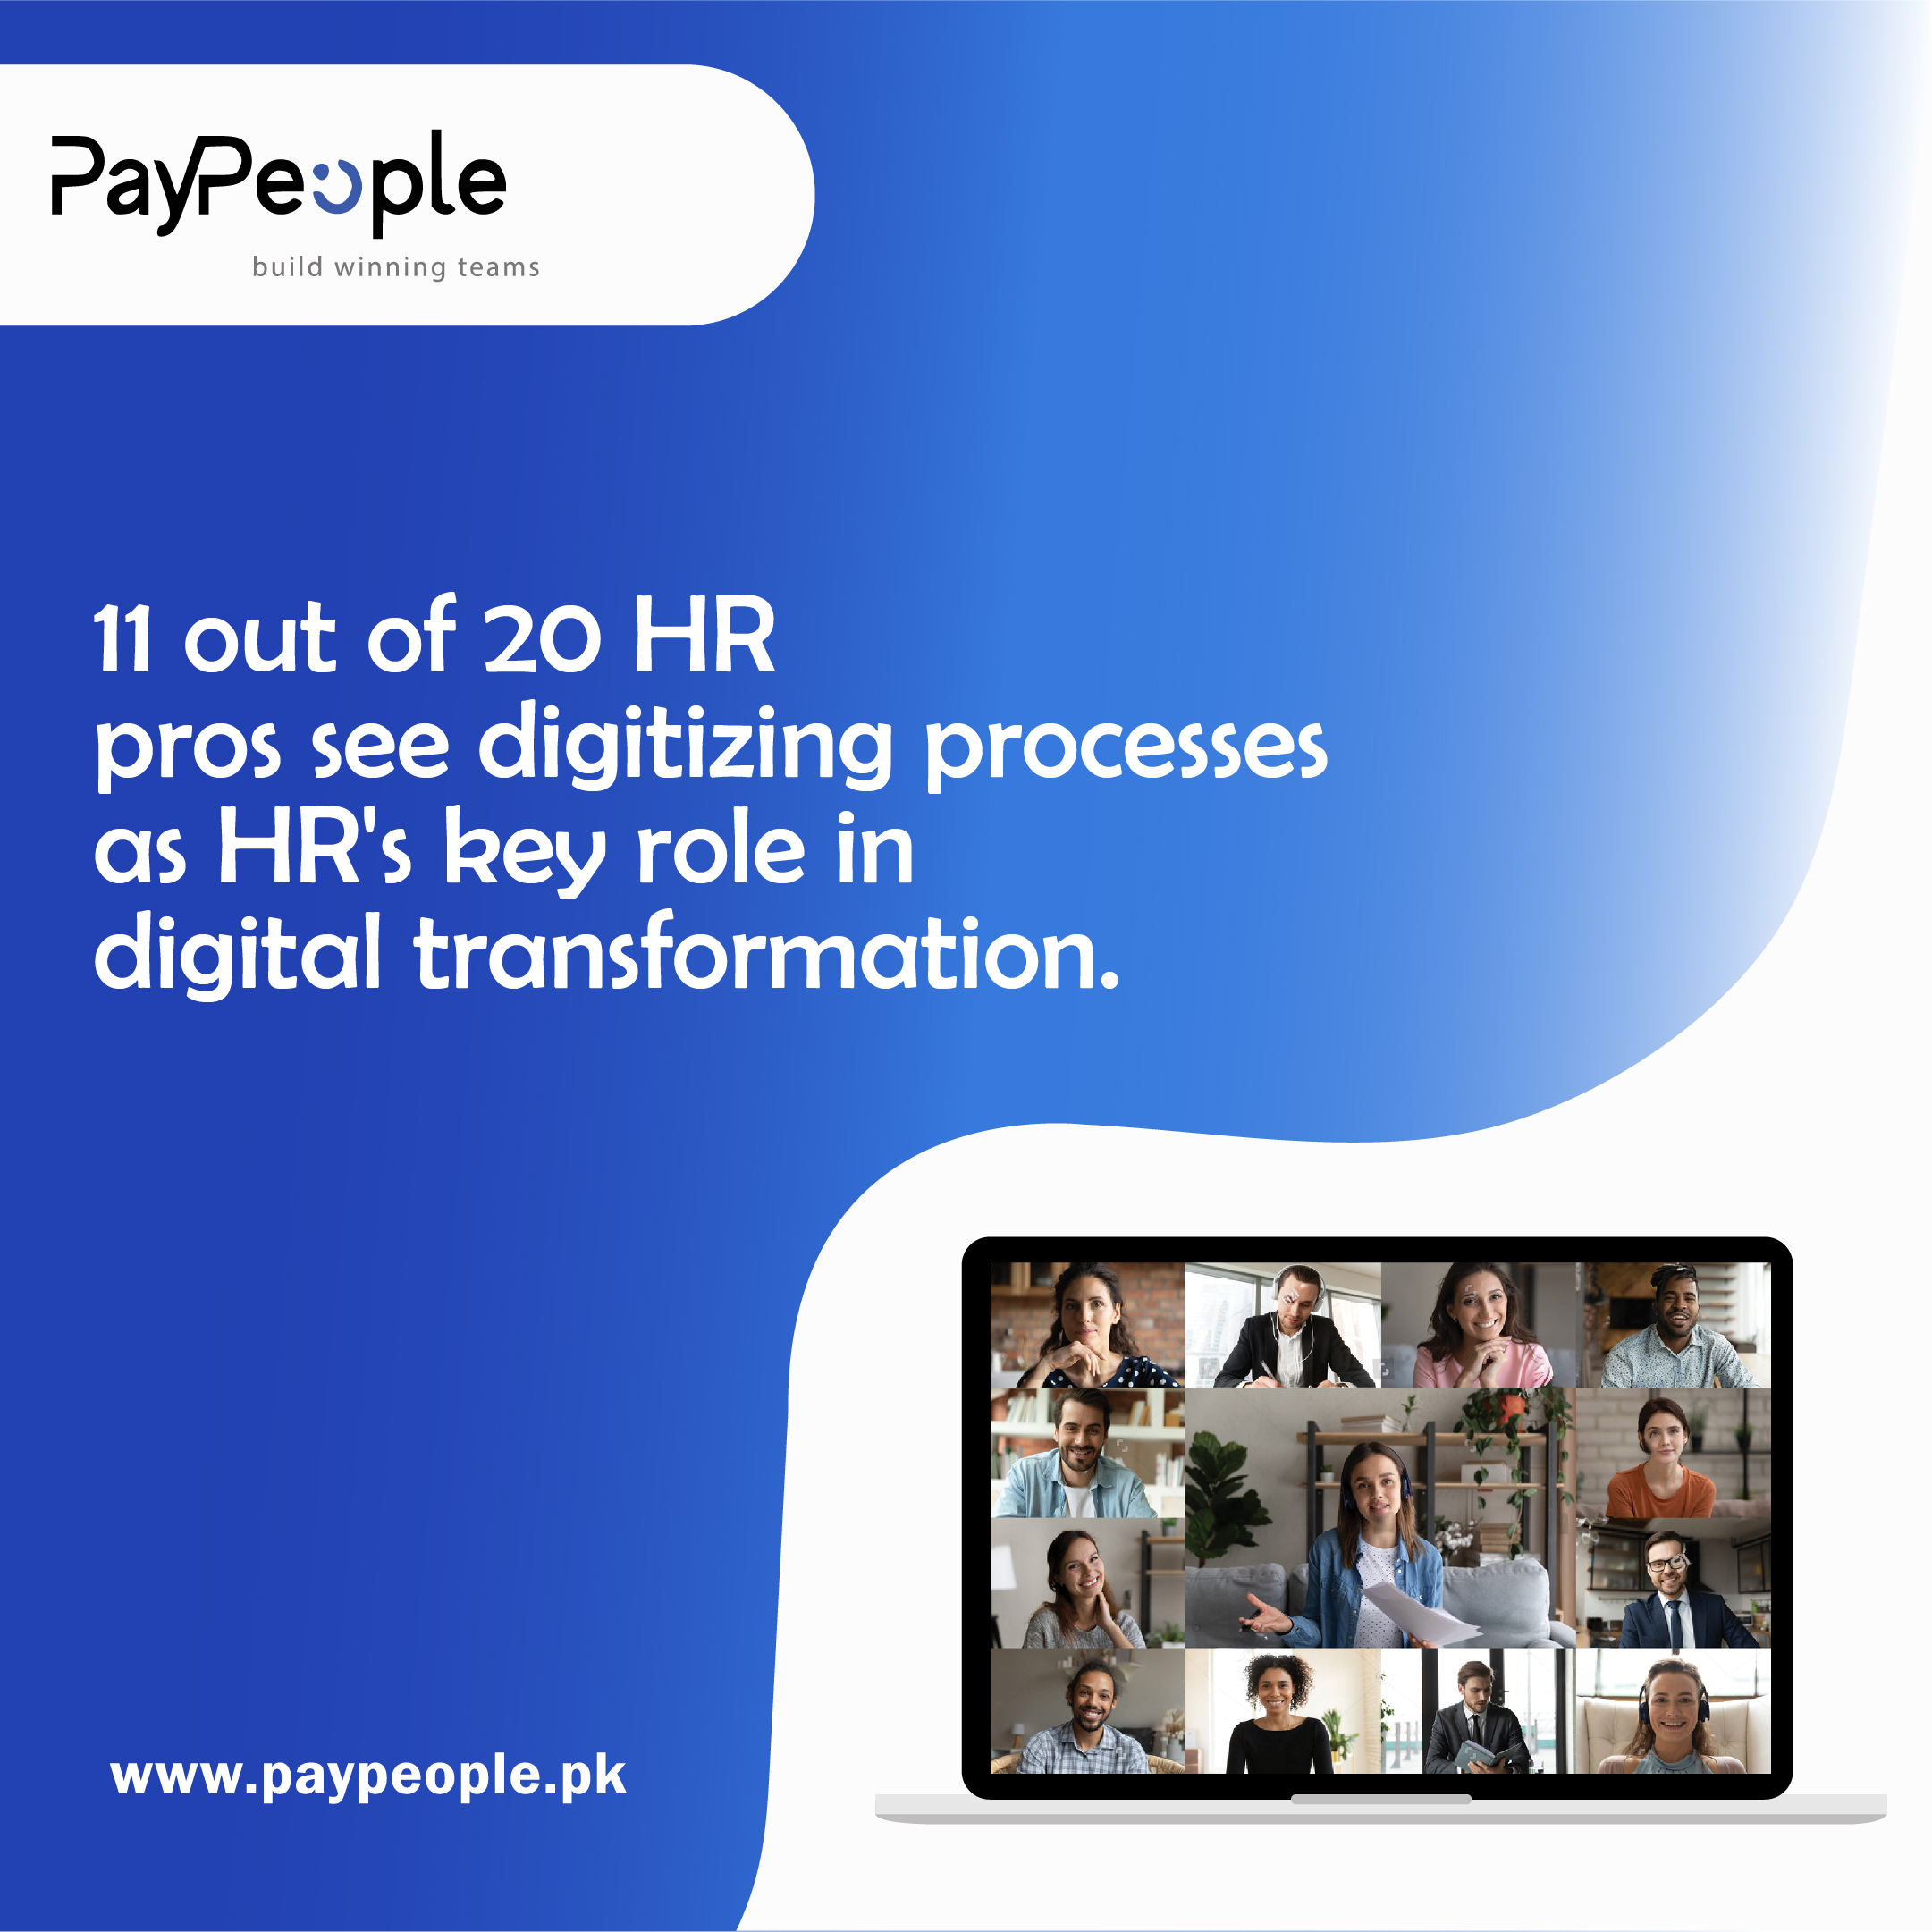 How does HR Software in Pakistan streamline payroll processing?